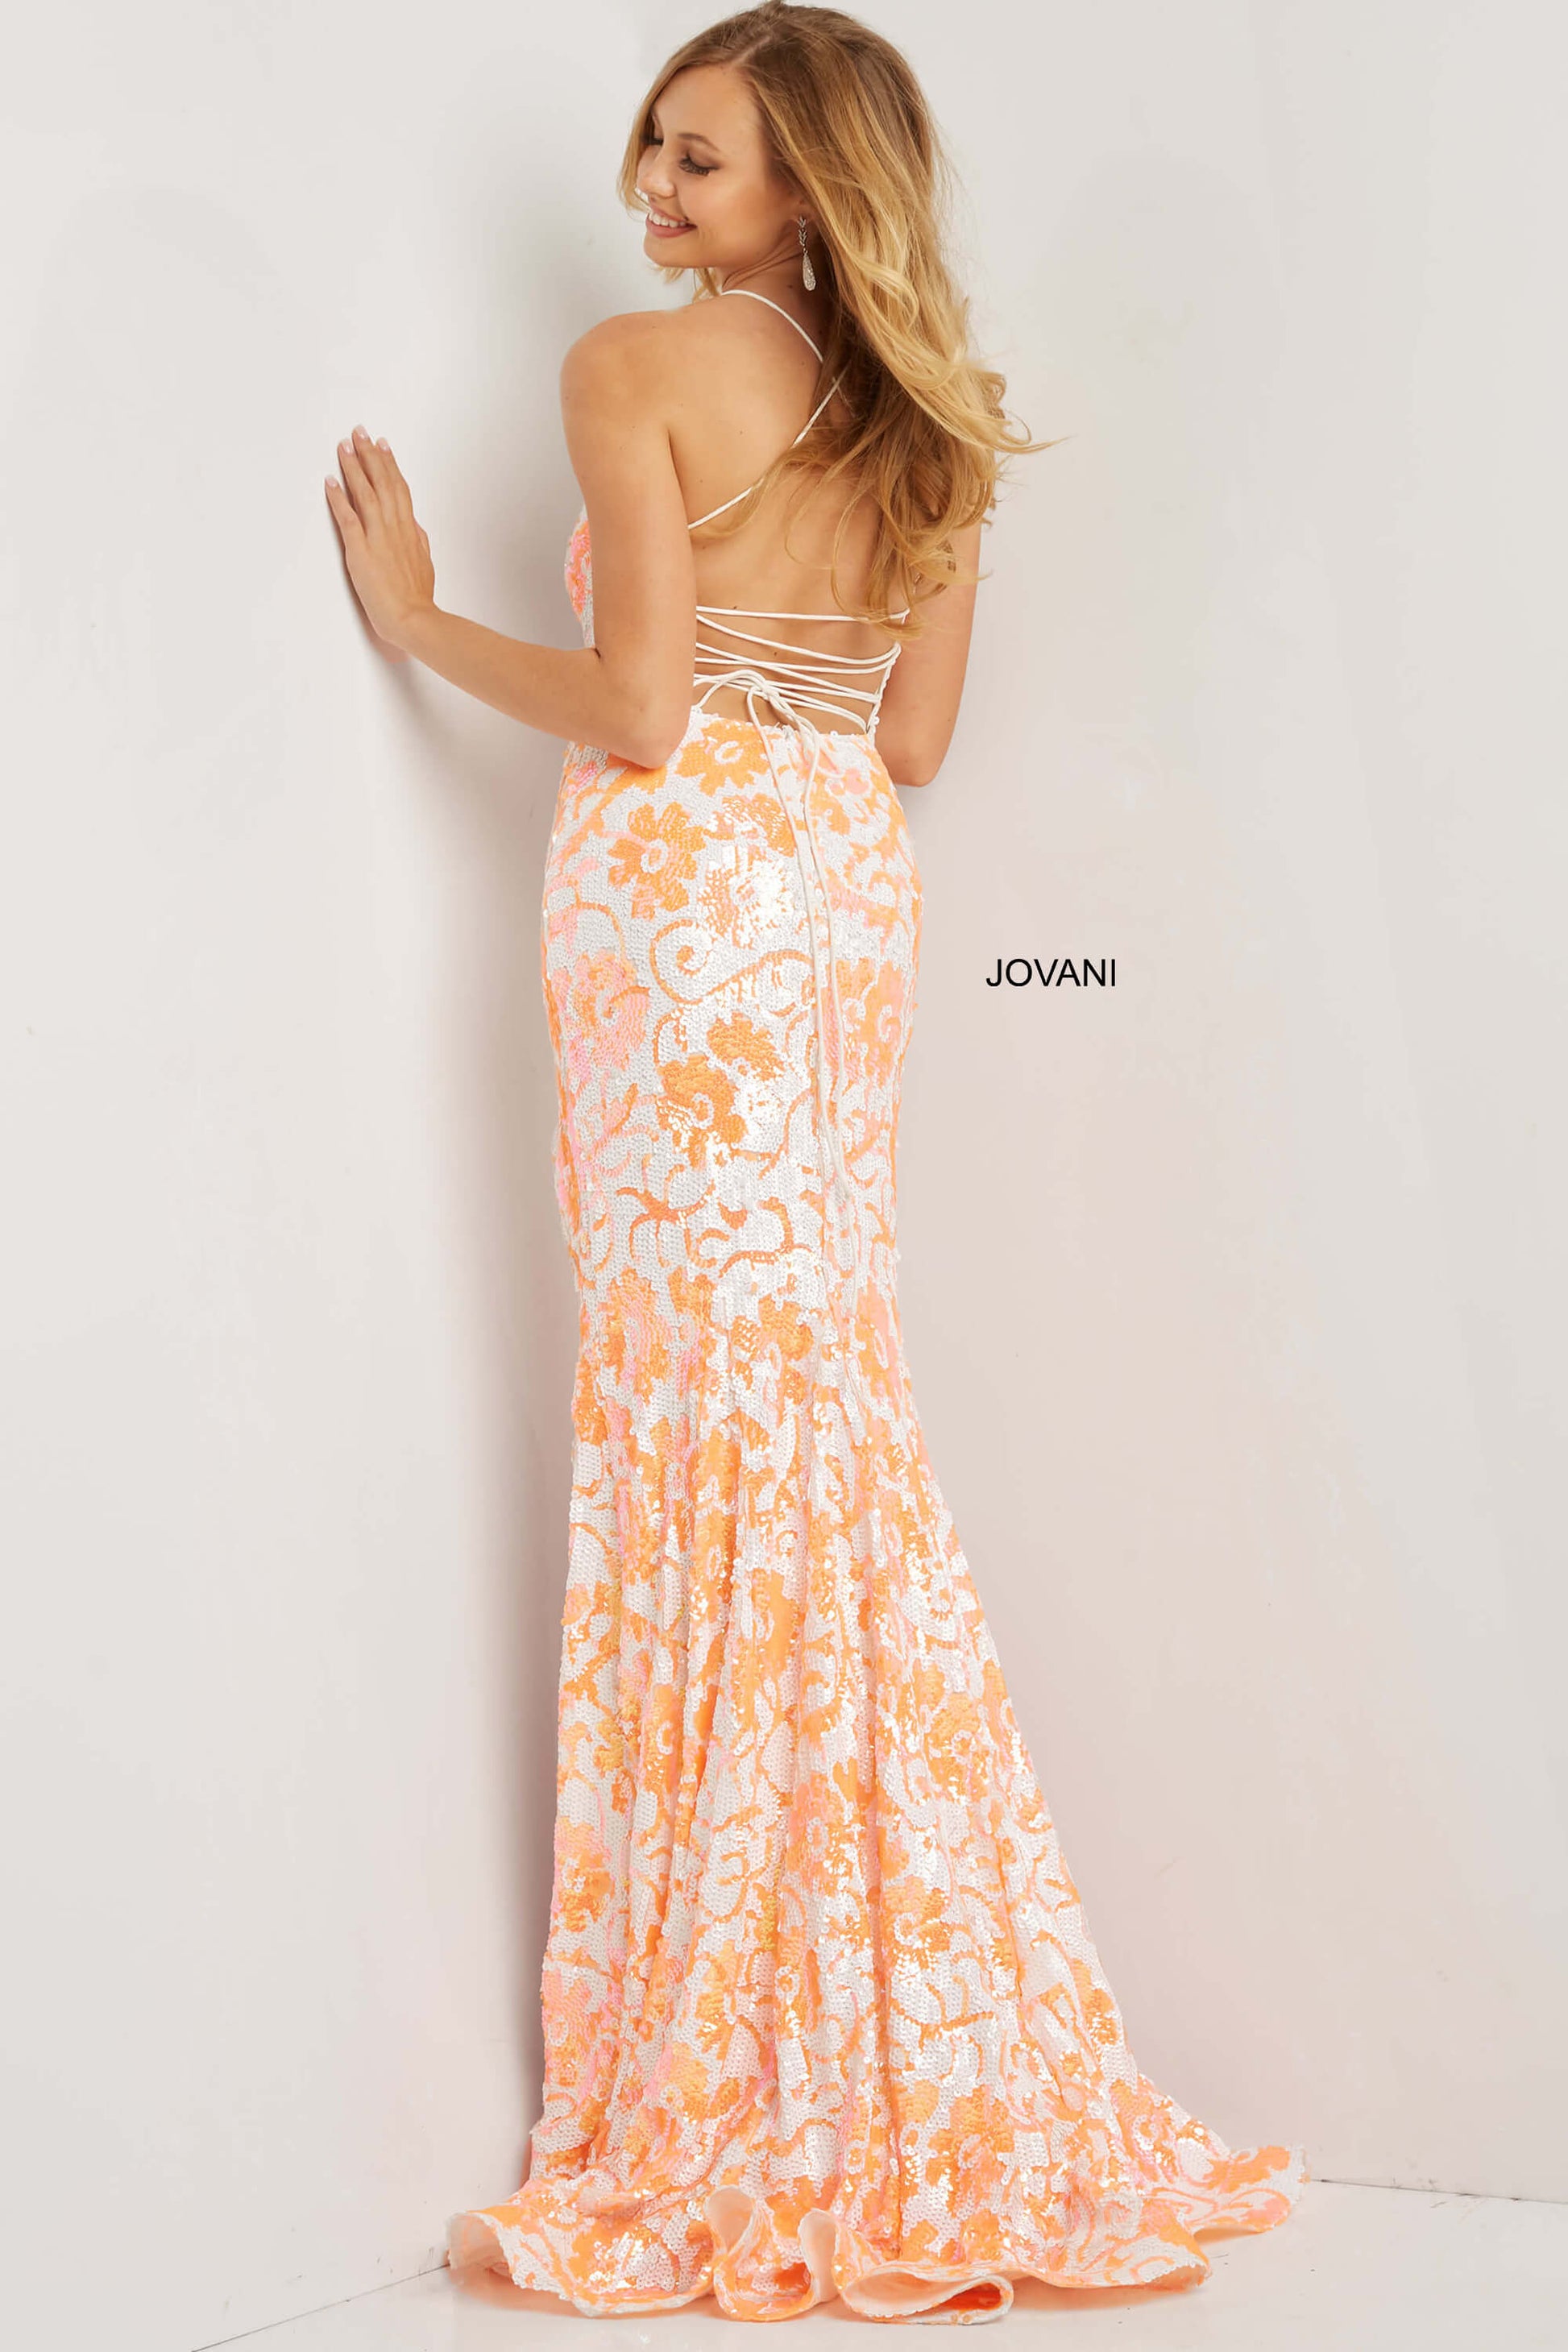 Jovani 08255 Long Straight Prom Pageant Gown  Floral Embellished dress  Available Size- 00-24  Available Color- Ivory/Light Orange, Ivory/Purple, Ivory/Emerald 